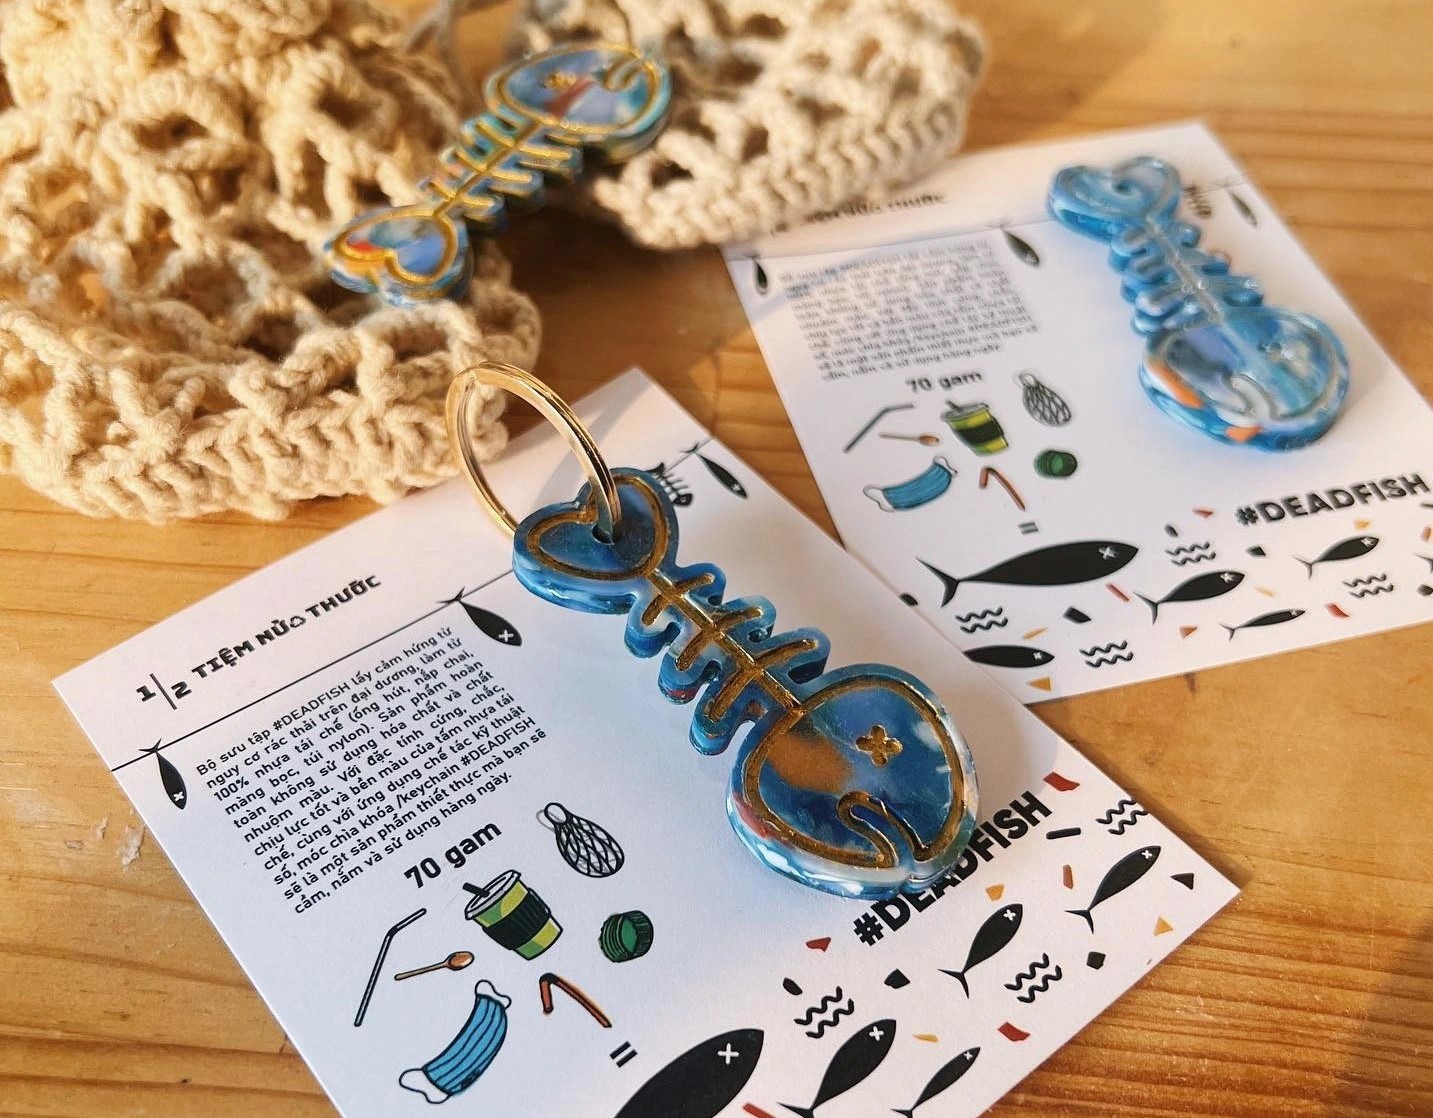 Crafted with inspiration from the risks associated with plastic waste in the ocean, these keychain models are made from recycled materials, including straws, bottle caps, wrappers, and nylon bags. Photo: Tiem Nua Thuoc